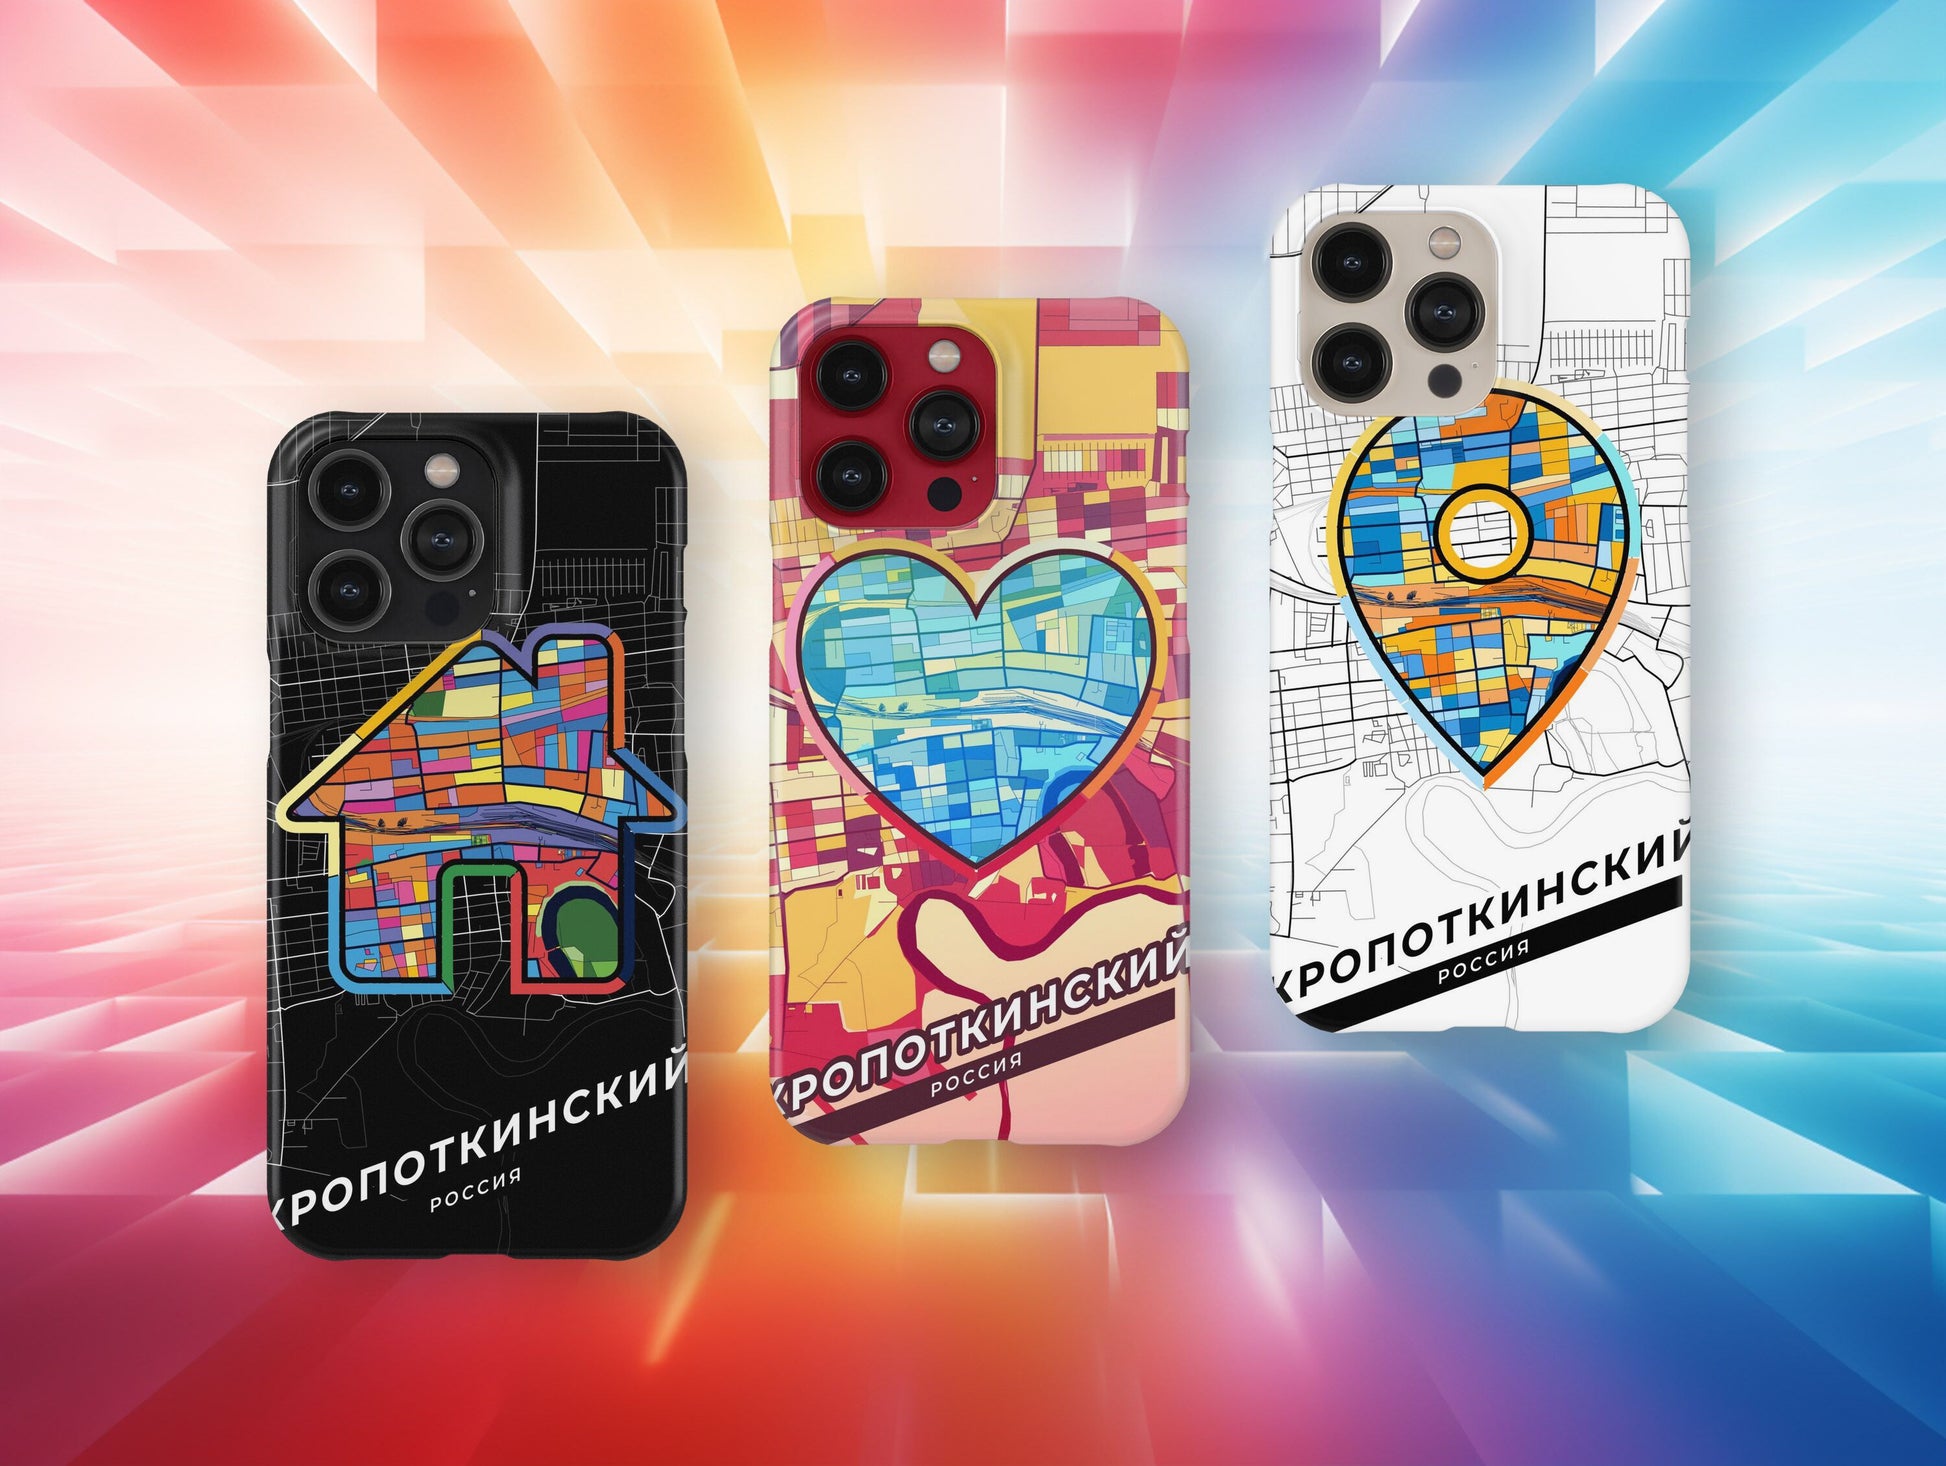 Kropotkin Russia slim phone case with colorful icon. Birthday, wedding or housewarming gift. Couple match cases.